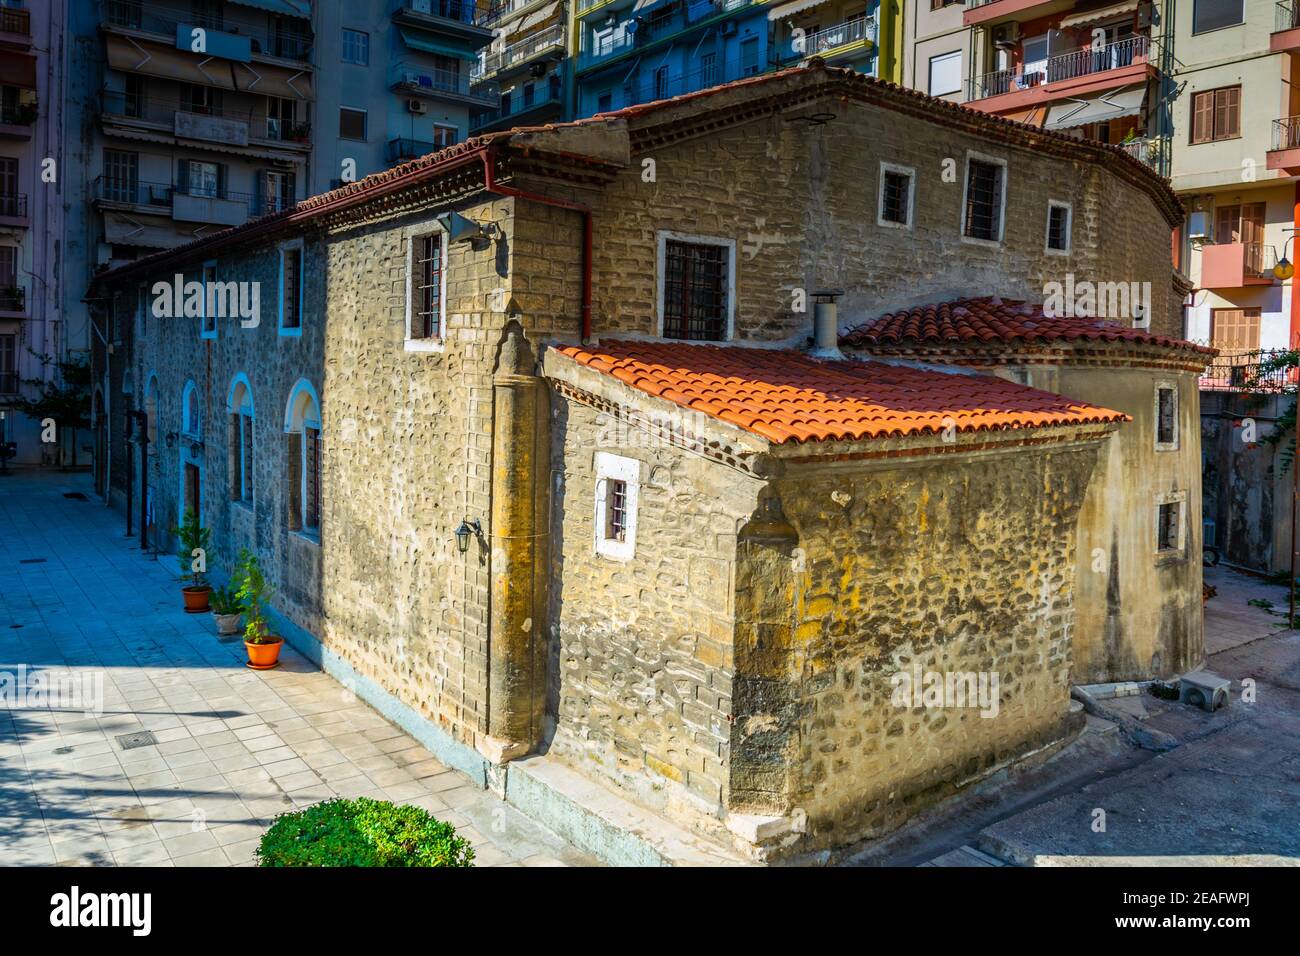 Church surrounded by buildings in Thessaloniki, Greece Stock Photo